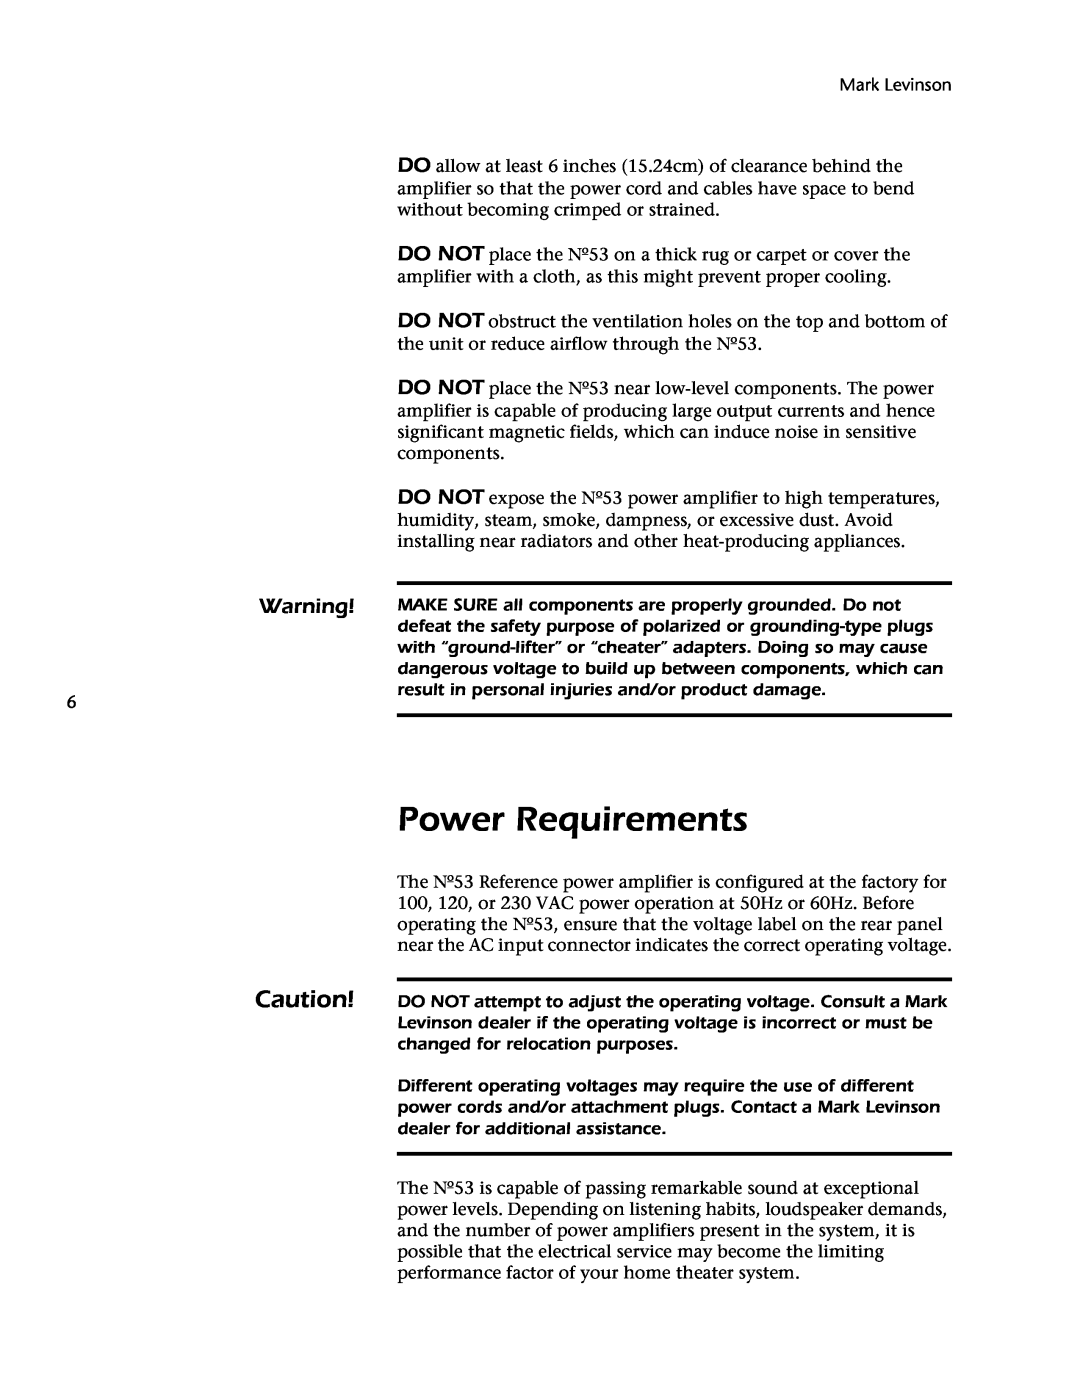 Mark Levinson 53 owner manual Power Requirements 